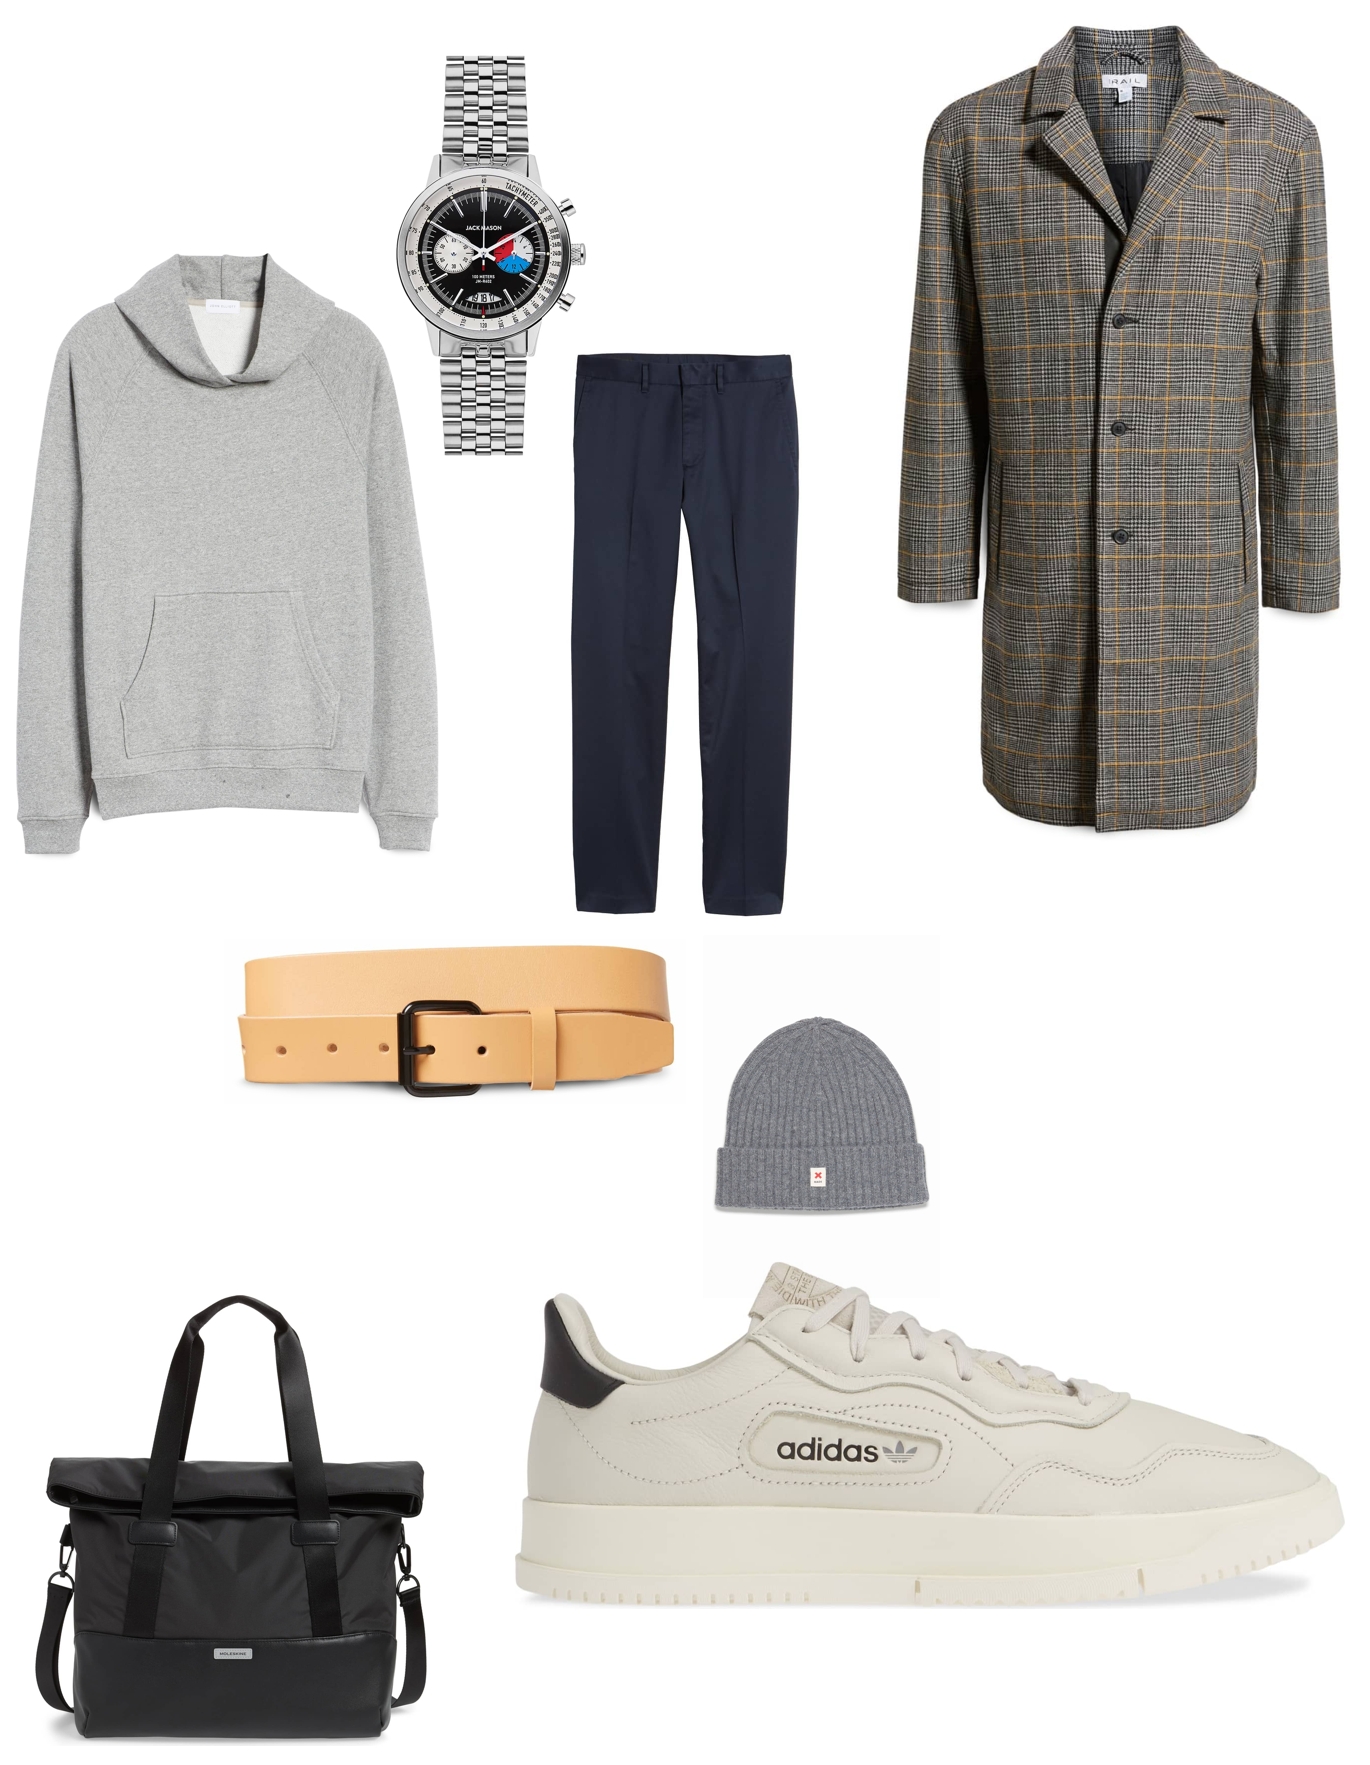 Stylish cool work outfit inspiration